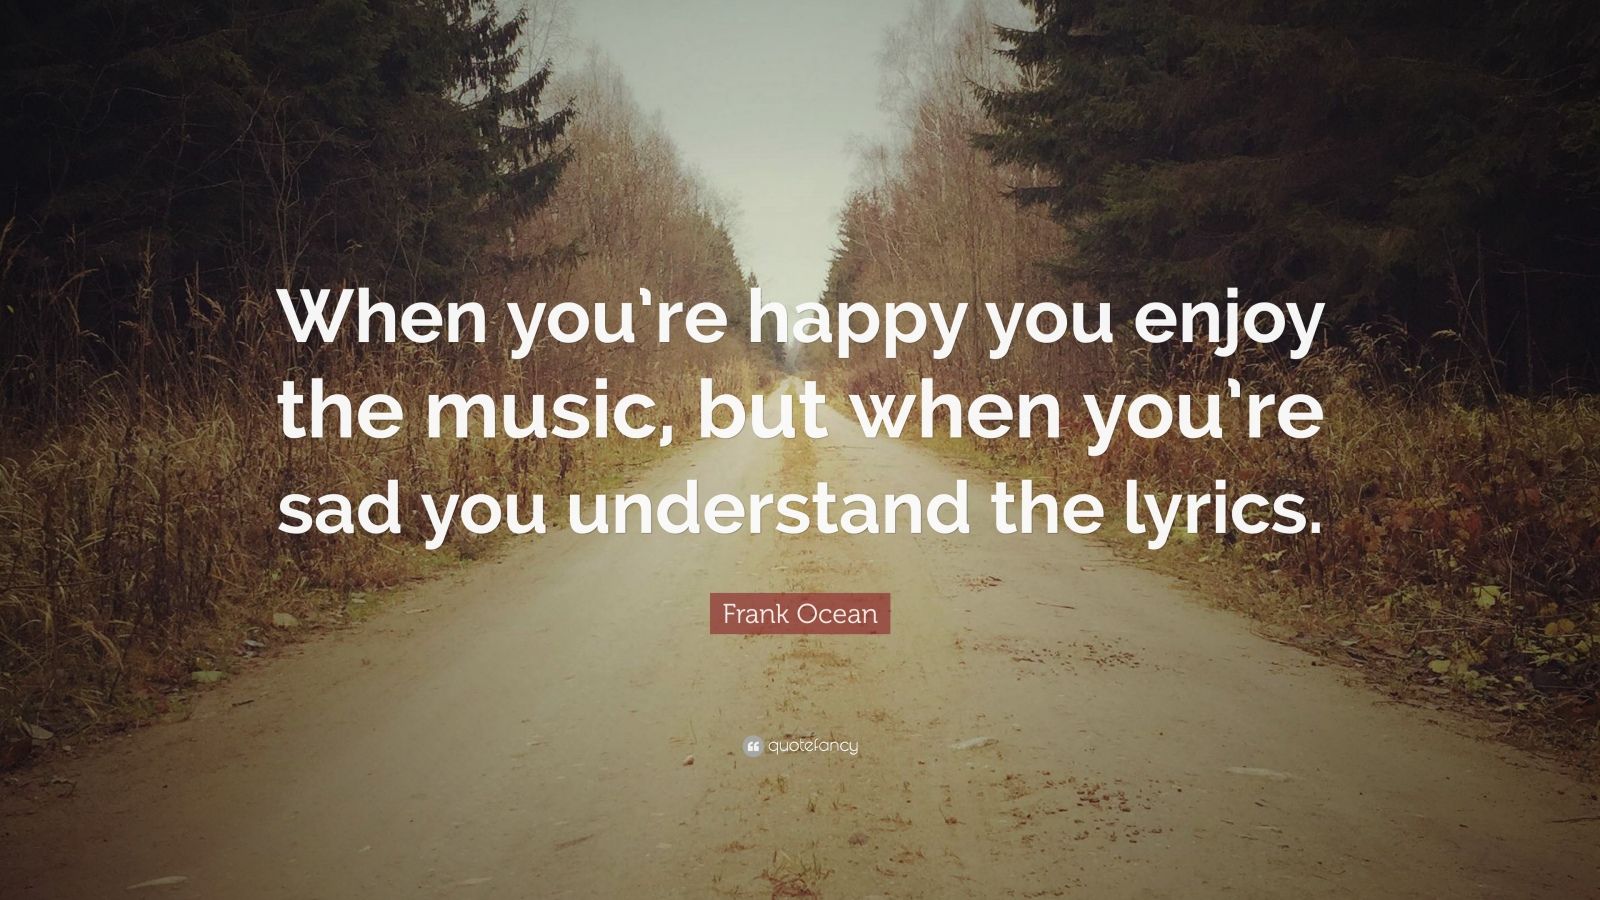 Frank Ocean Quote: “When you’re happy you enjoy the music, but when you